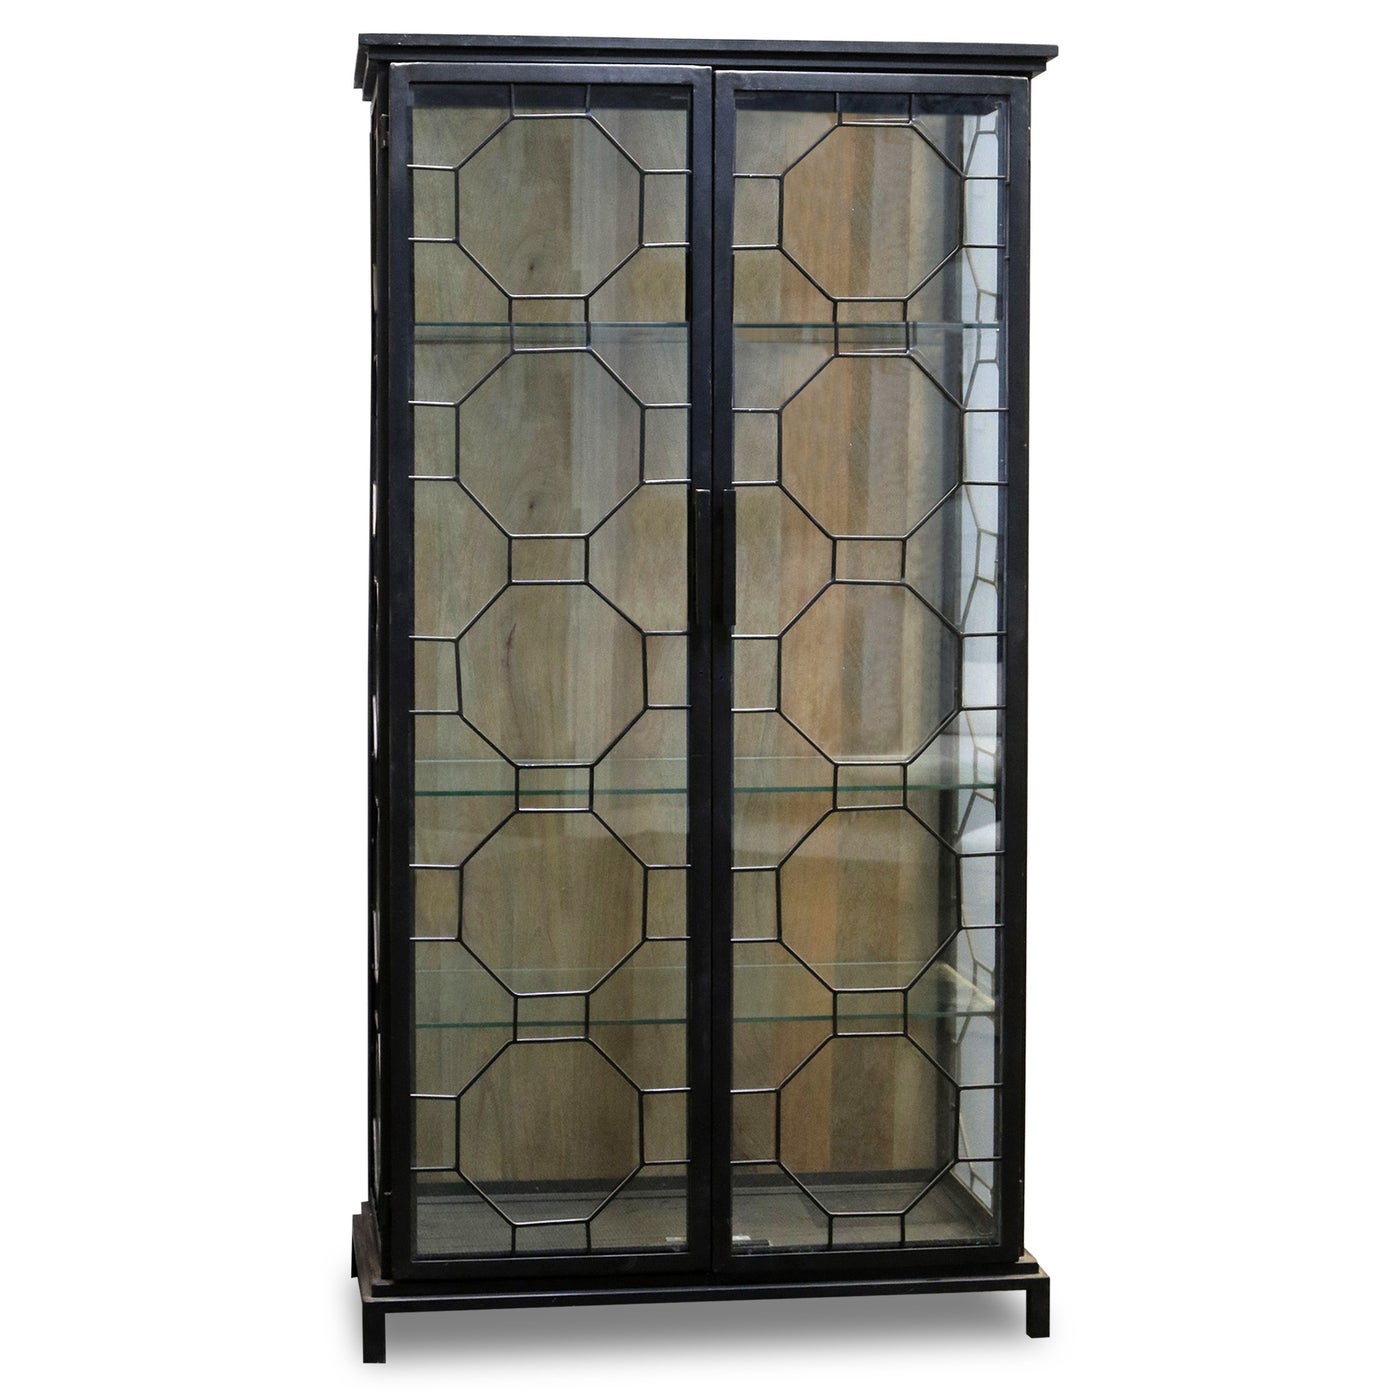 READING CABINET | Black Finish on Metal Frame with Clear Glass | 2 Door